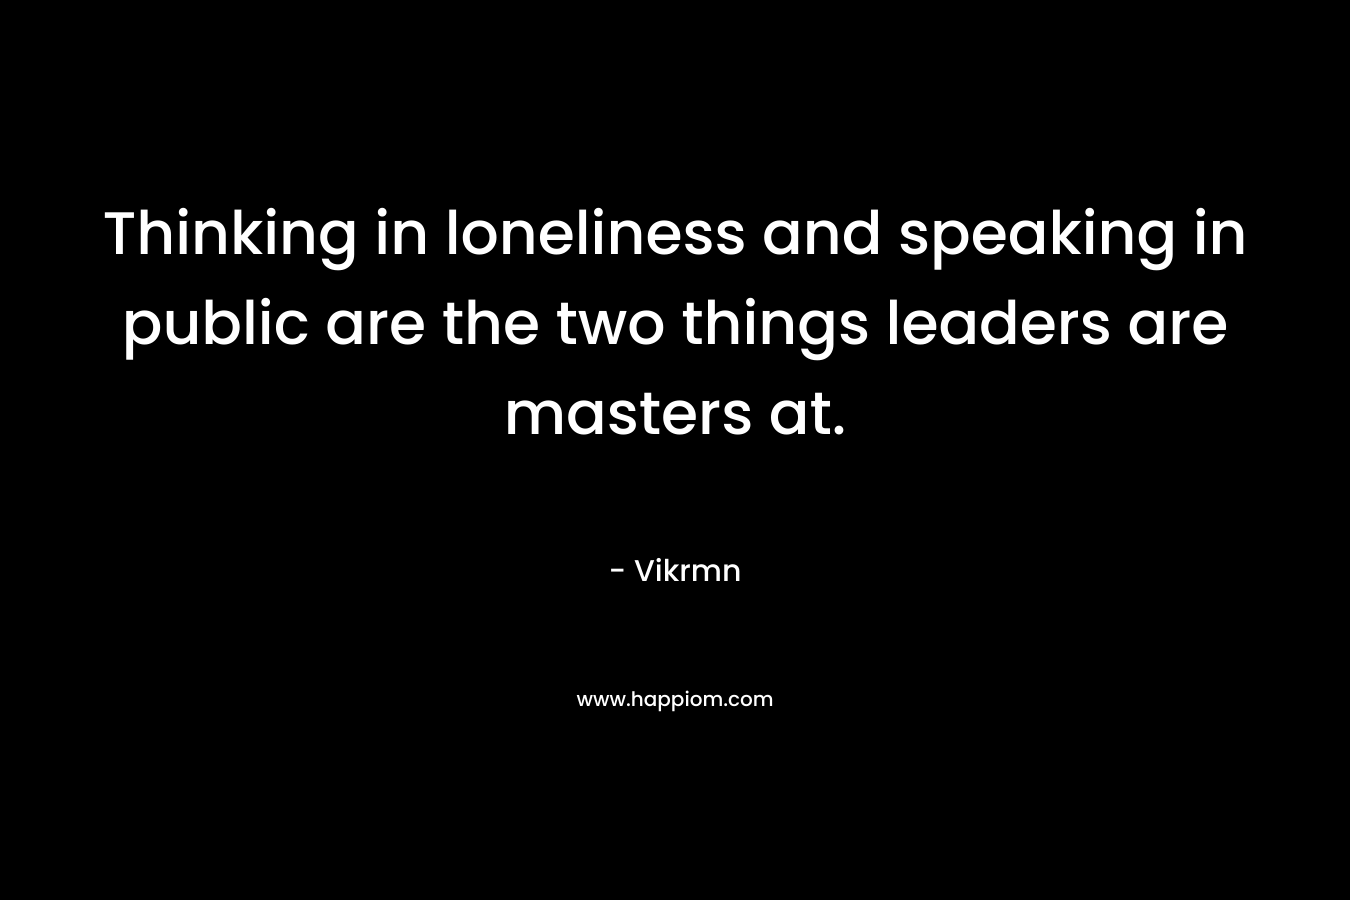 Thinking in loneliness and speaking in public are the two things leaders are masters at.